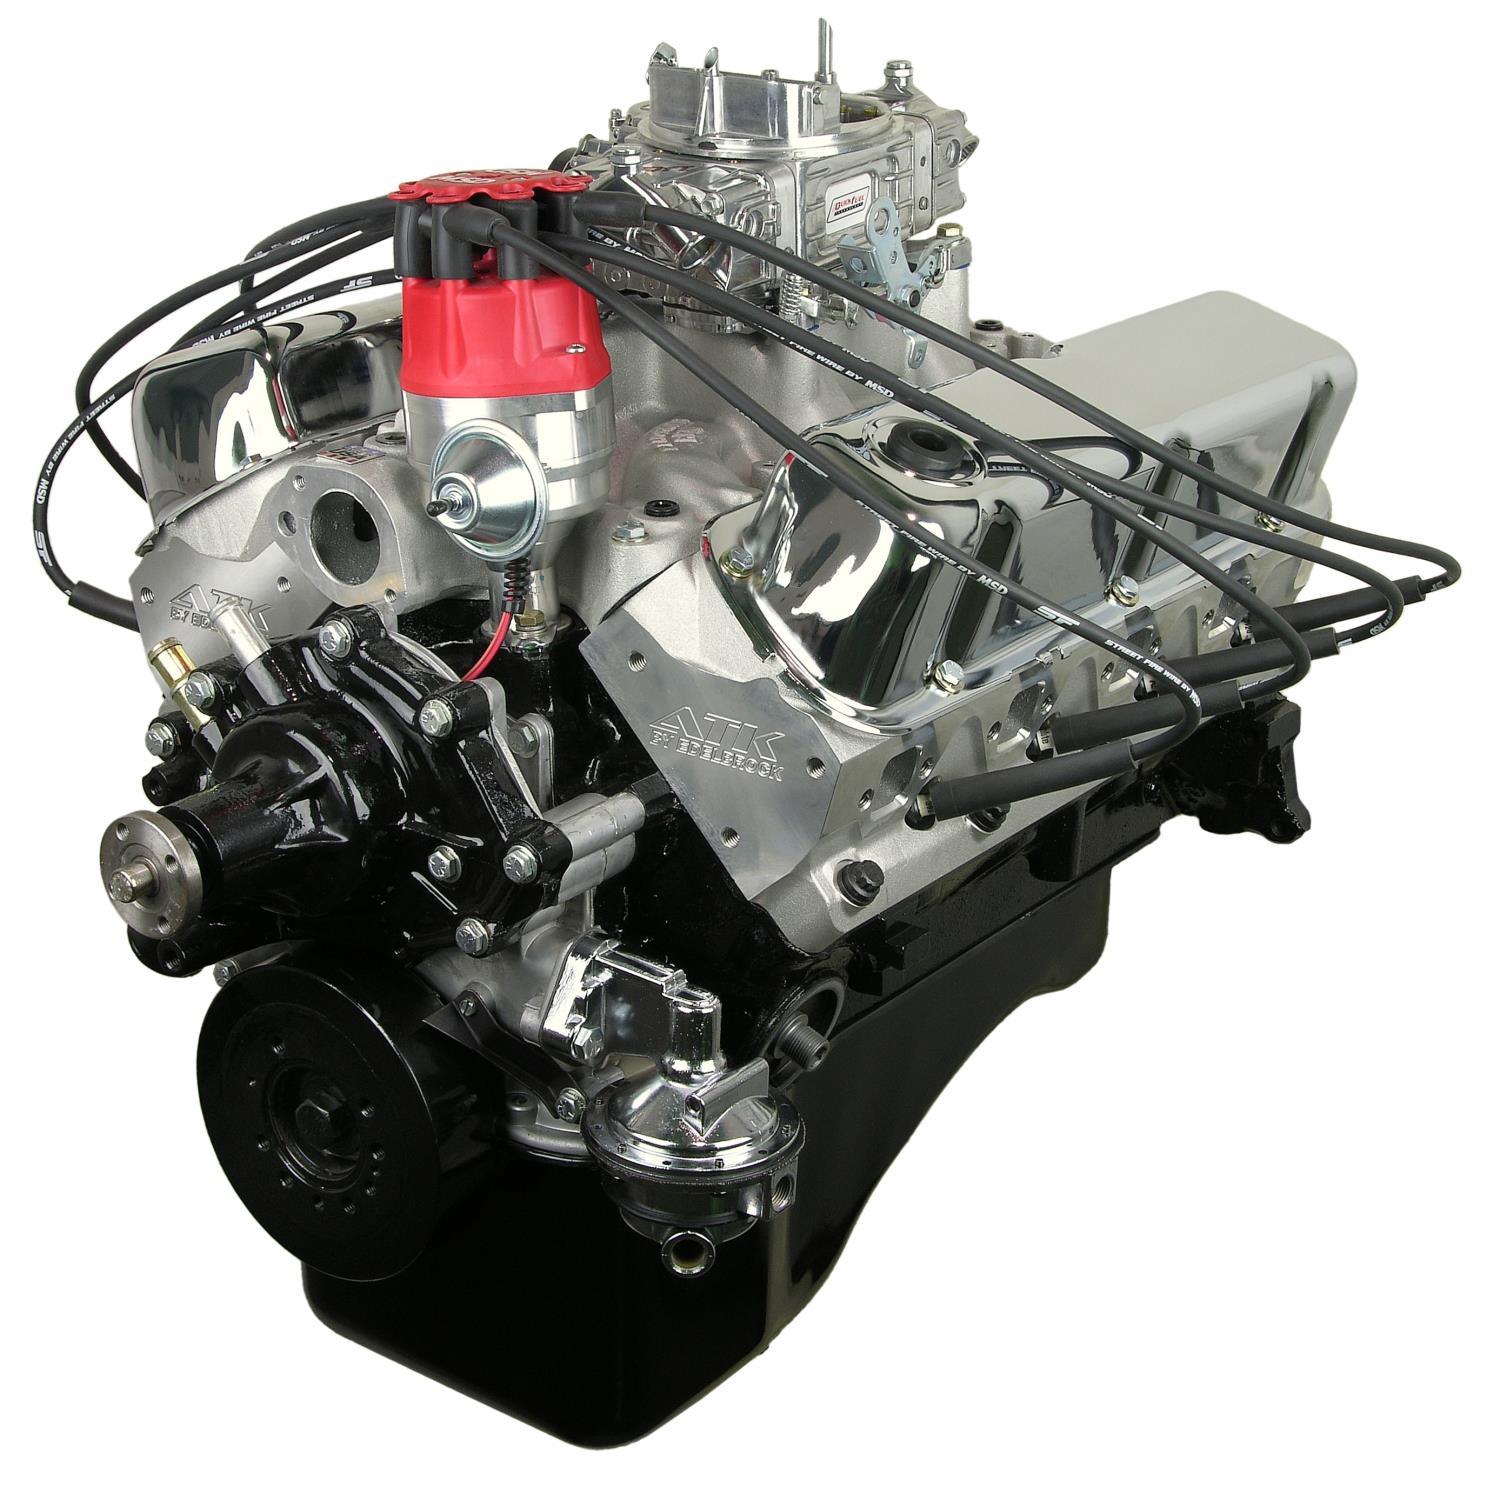 HP11C High Performance Crate Engine Small Block Ford 351W / 390HP / 420TQ